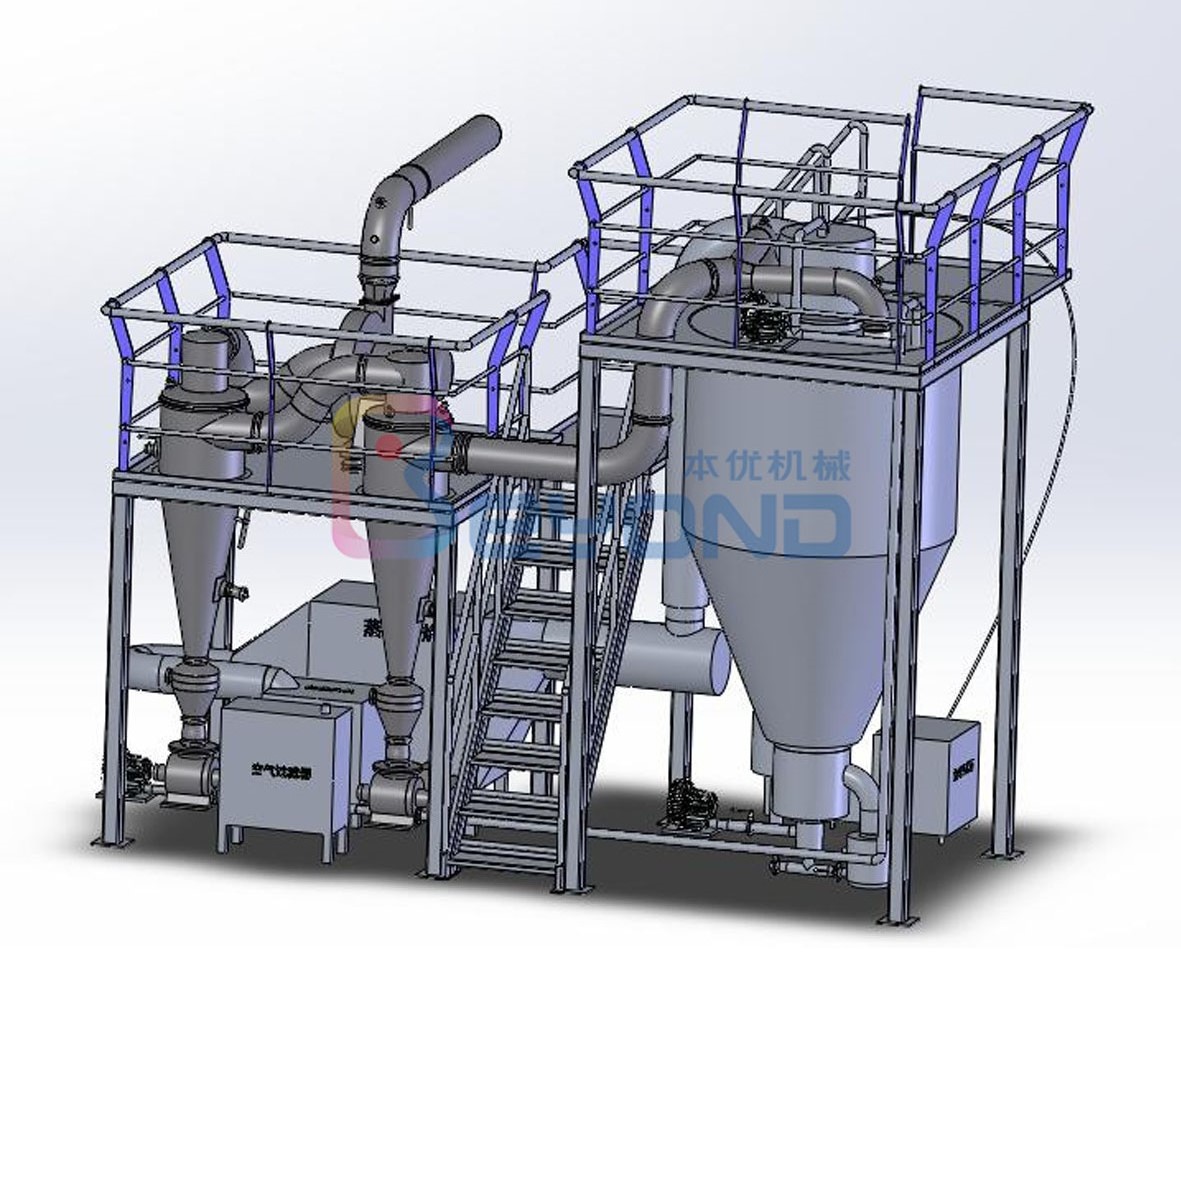 Equipment Overview of Experimental Drying Tower